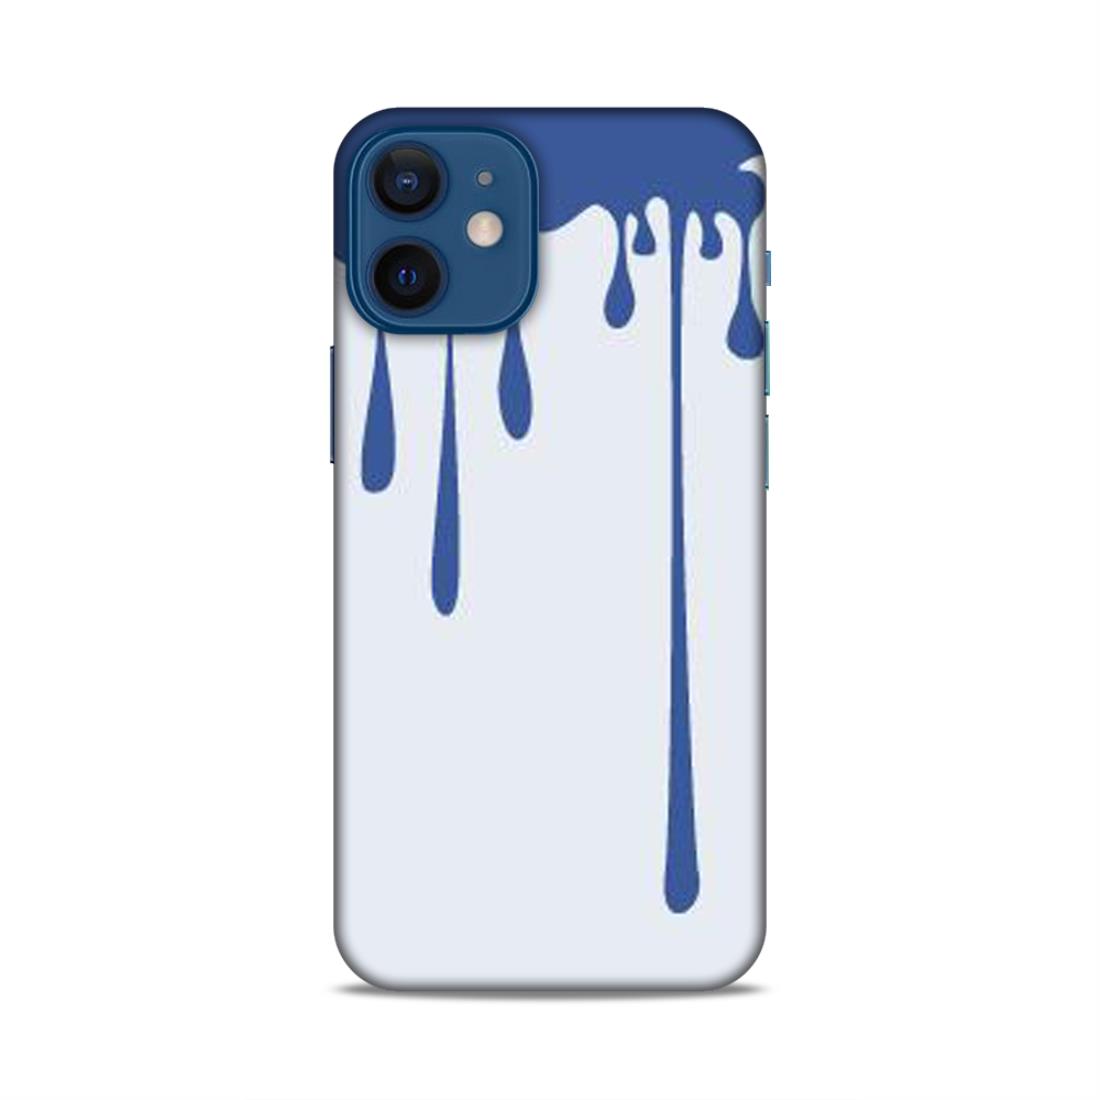 Abstract Hard Back Case For Apple iPhone 12 Mini